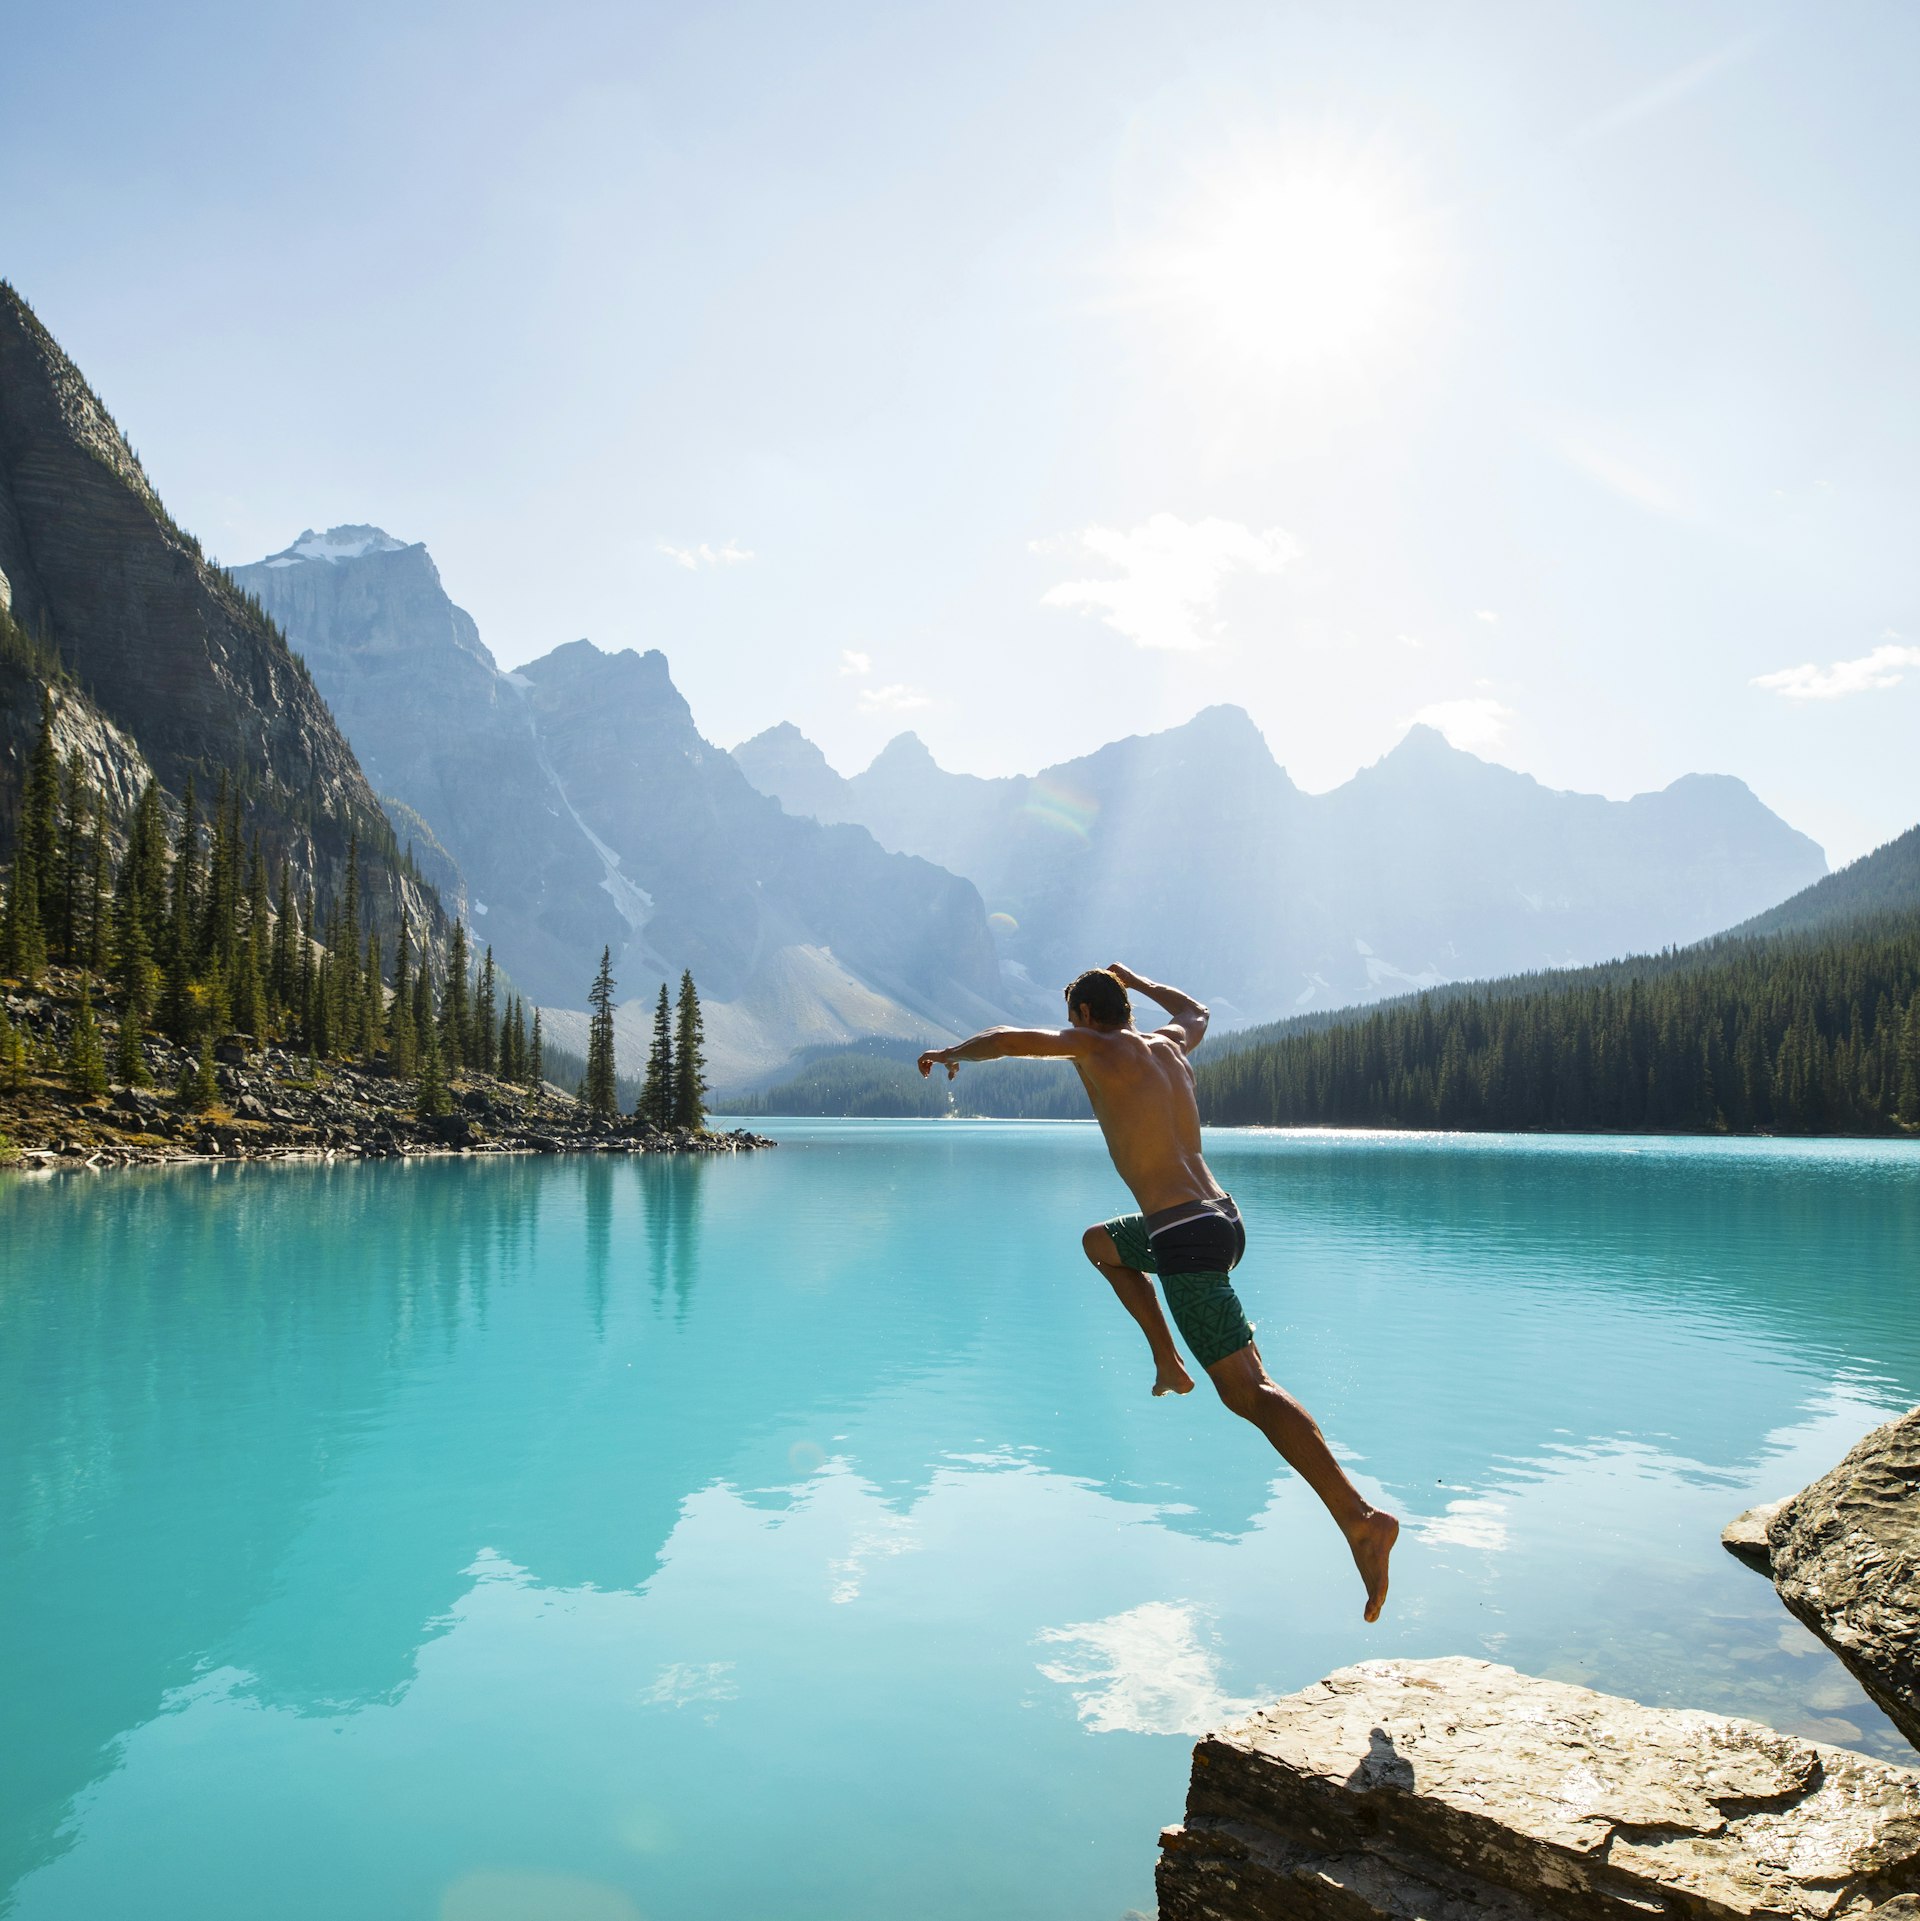 Jumping into the cool refreshing turquoise water of Lake Moraine